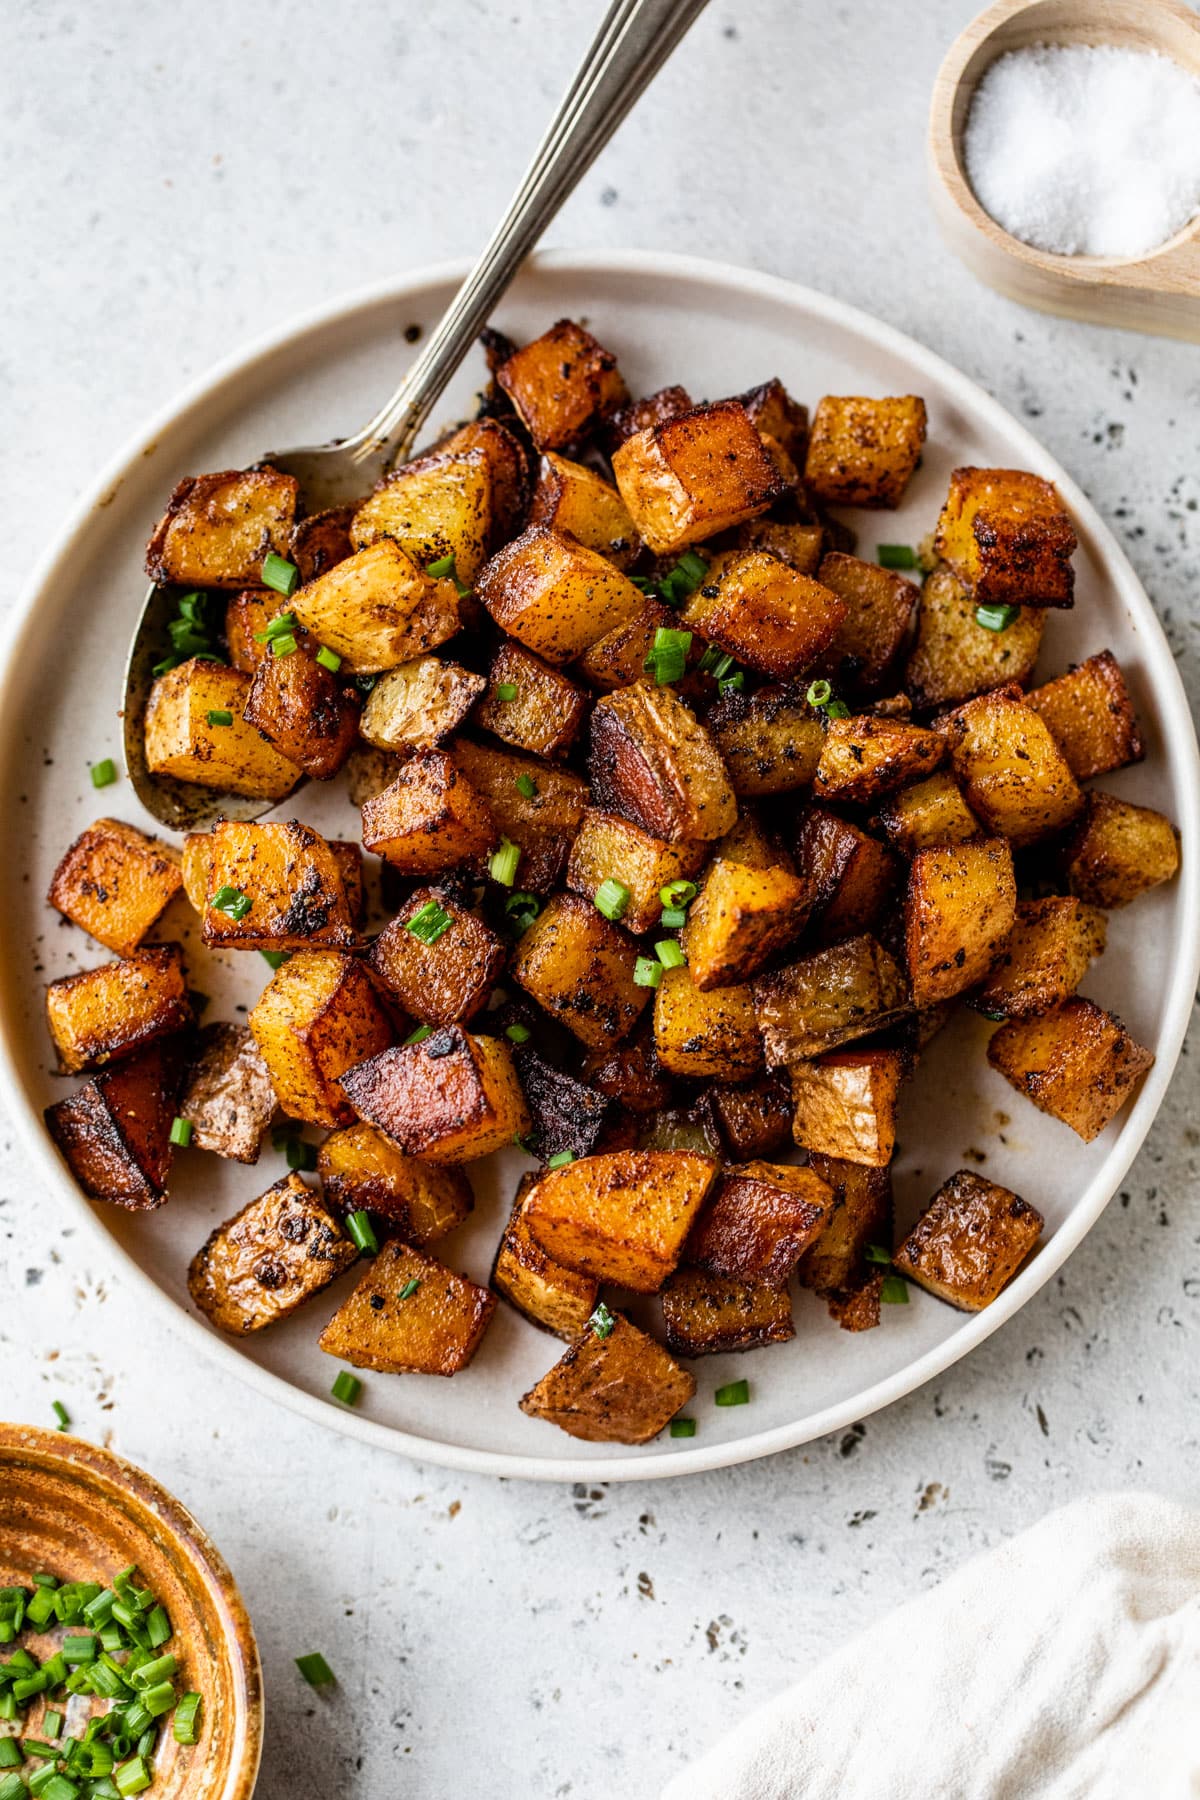 Crispy Home Fries: A Diner-Style Treat